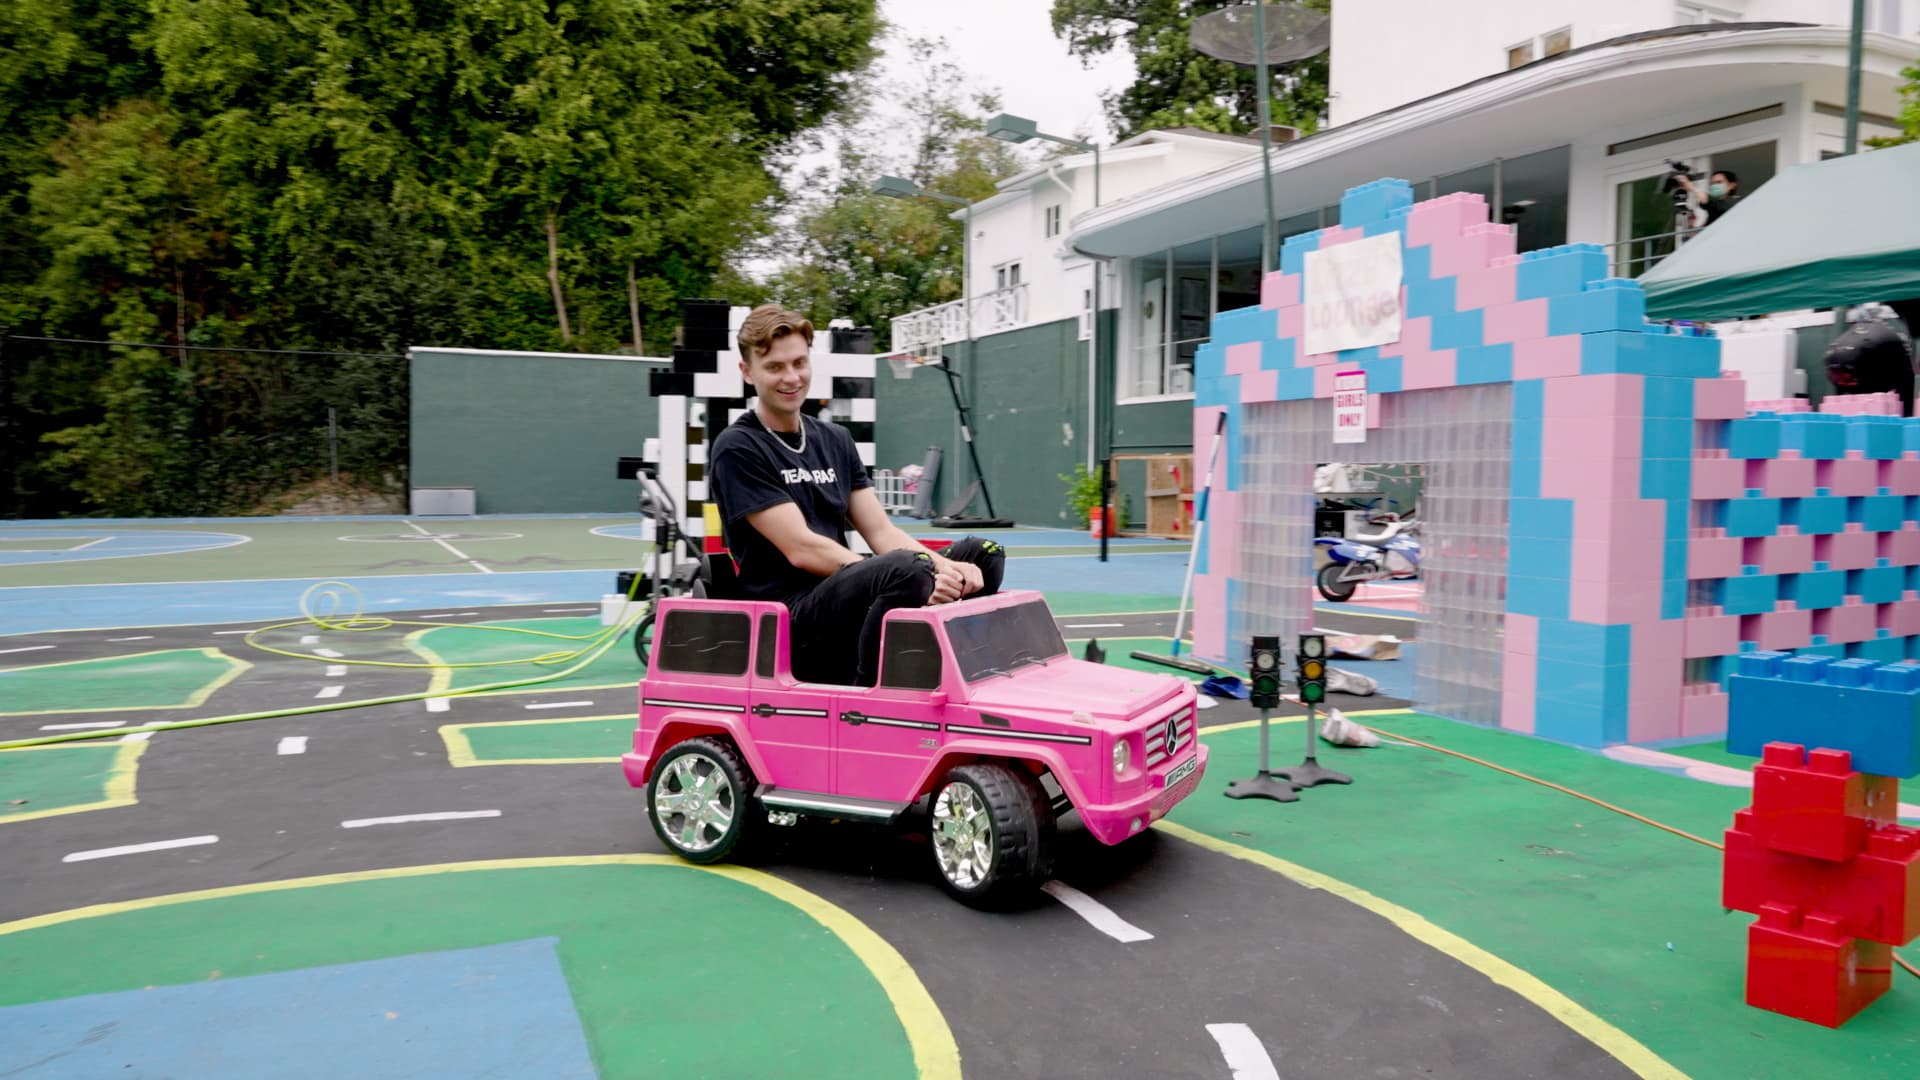 Sharer drives a miniature go-kart on their tennis court, which was converted into a life-sized LEGO World for a recent video.